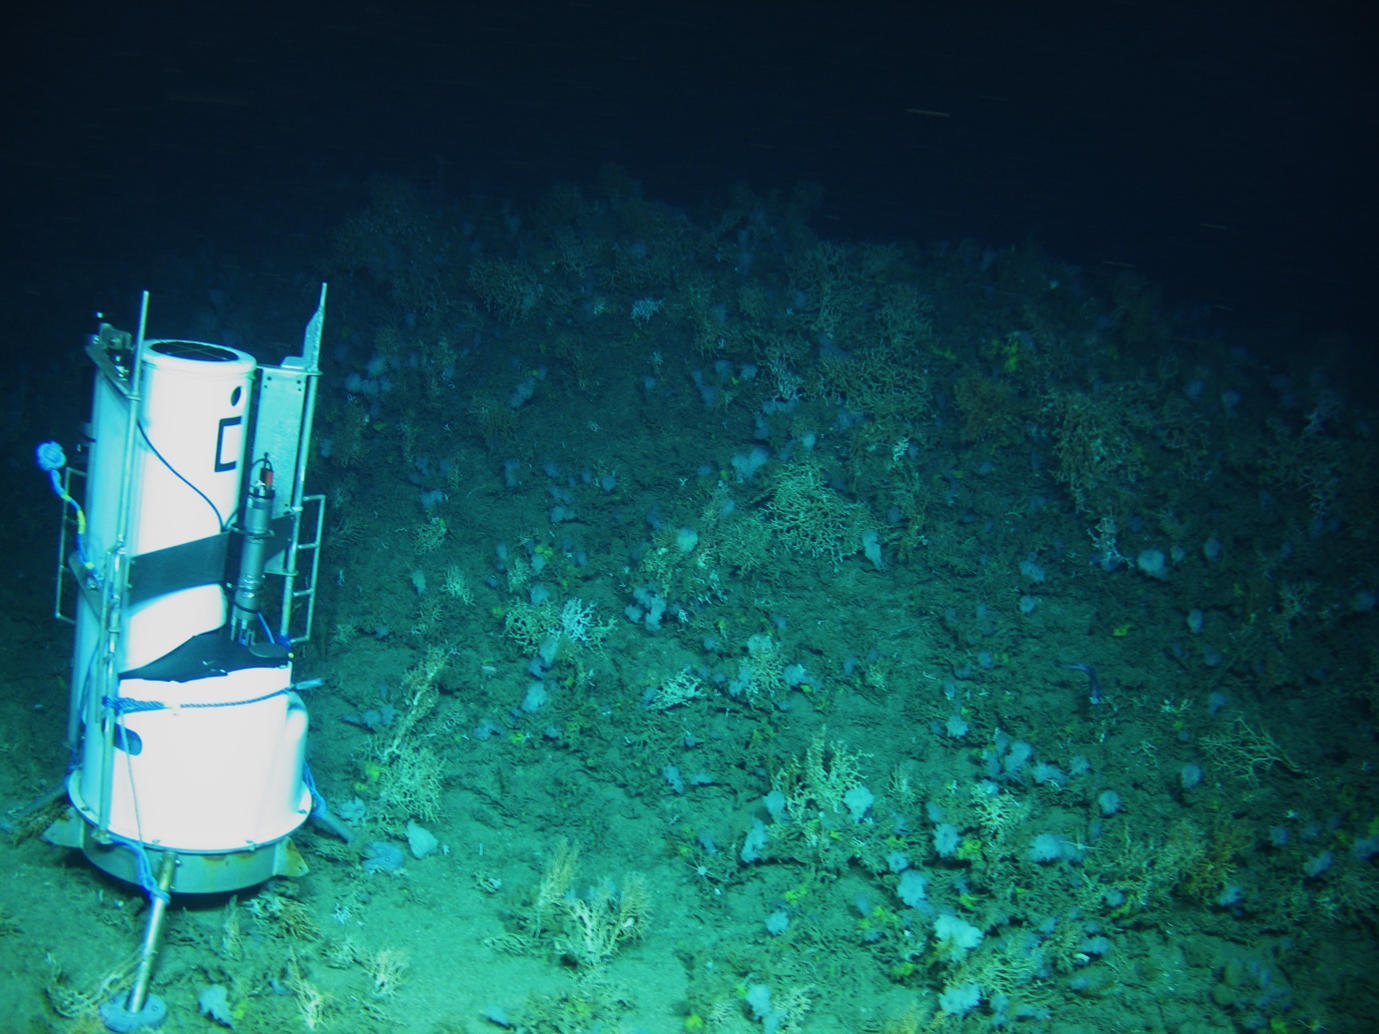 Monitoring equipment on the sea bed